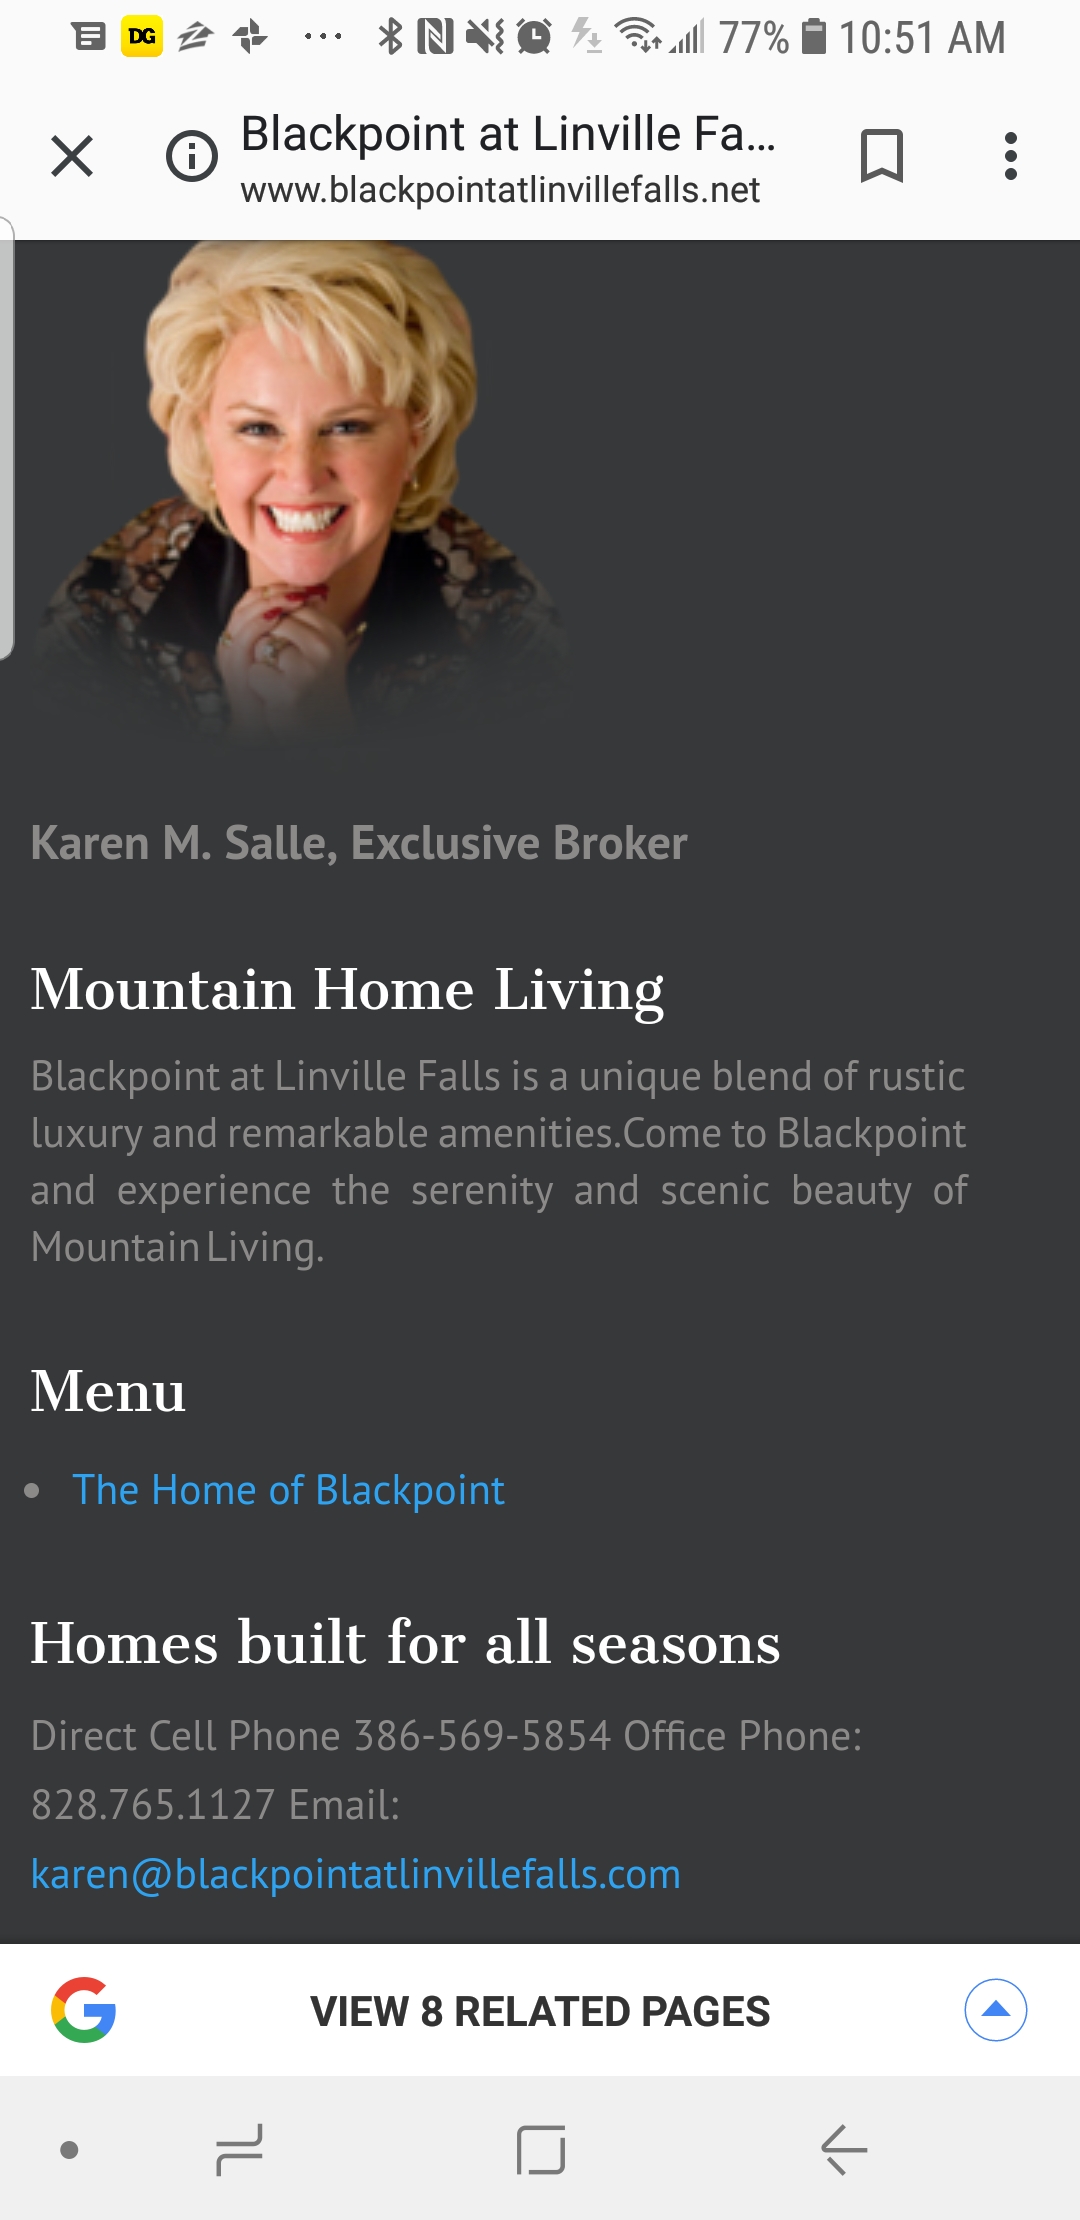 Karen Salle's web page which was designed by TheSa